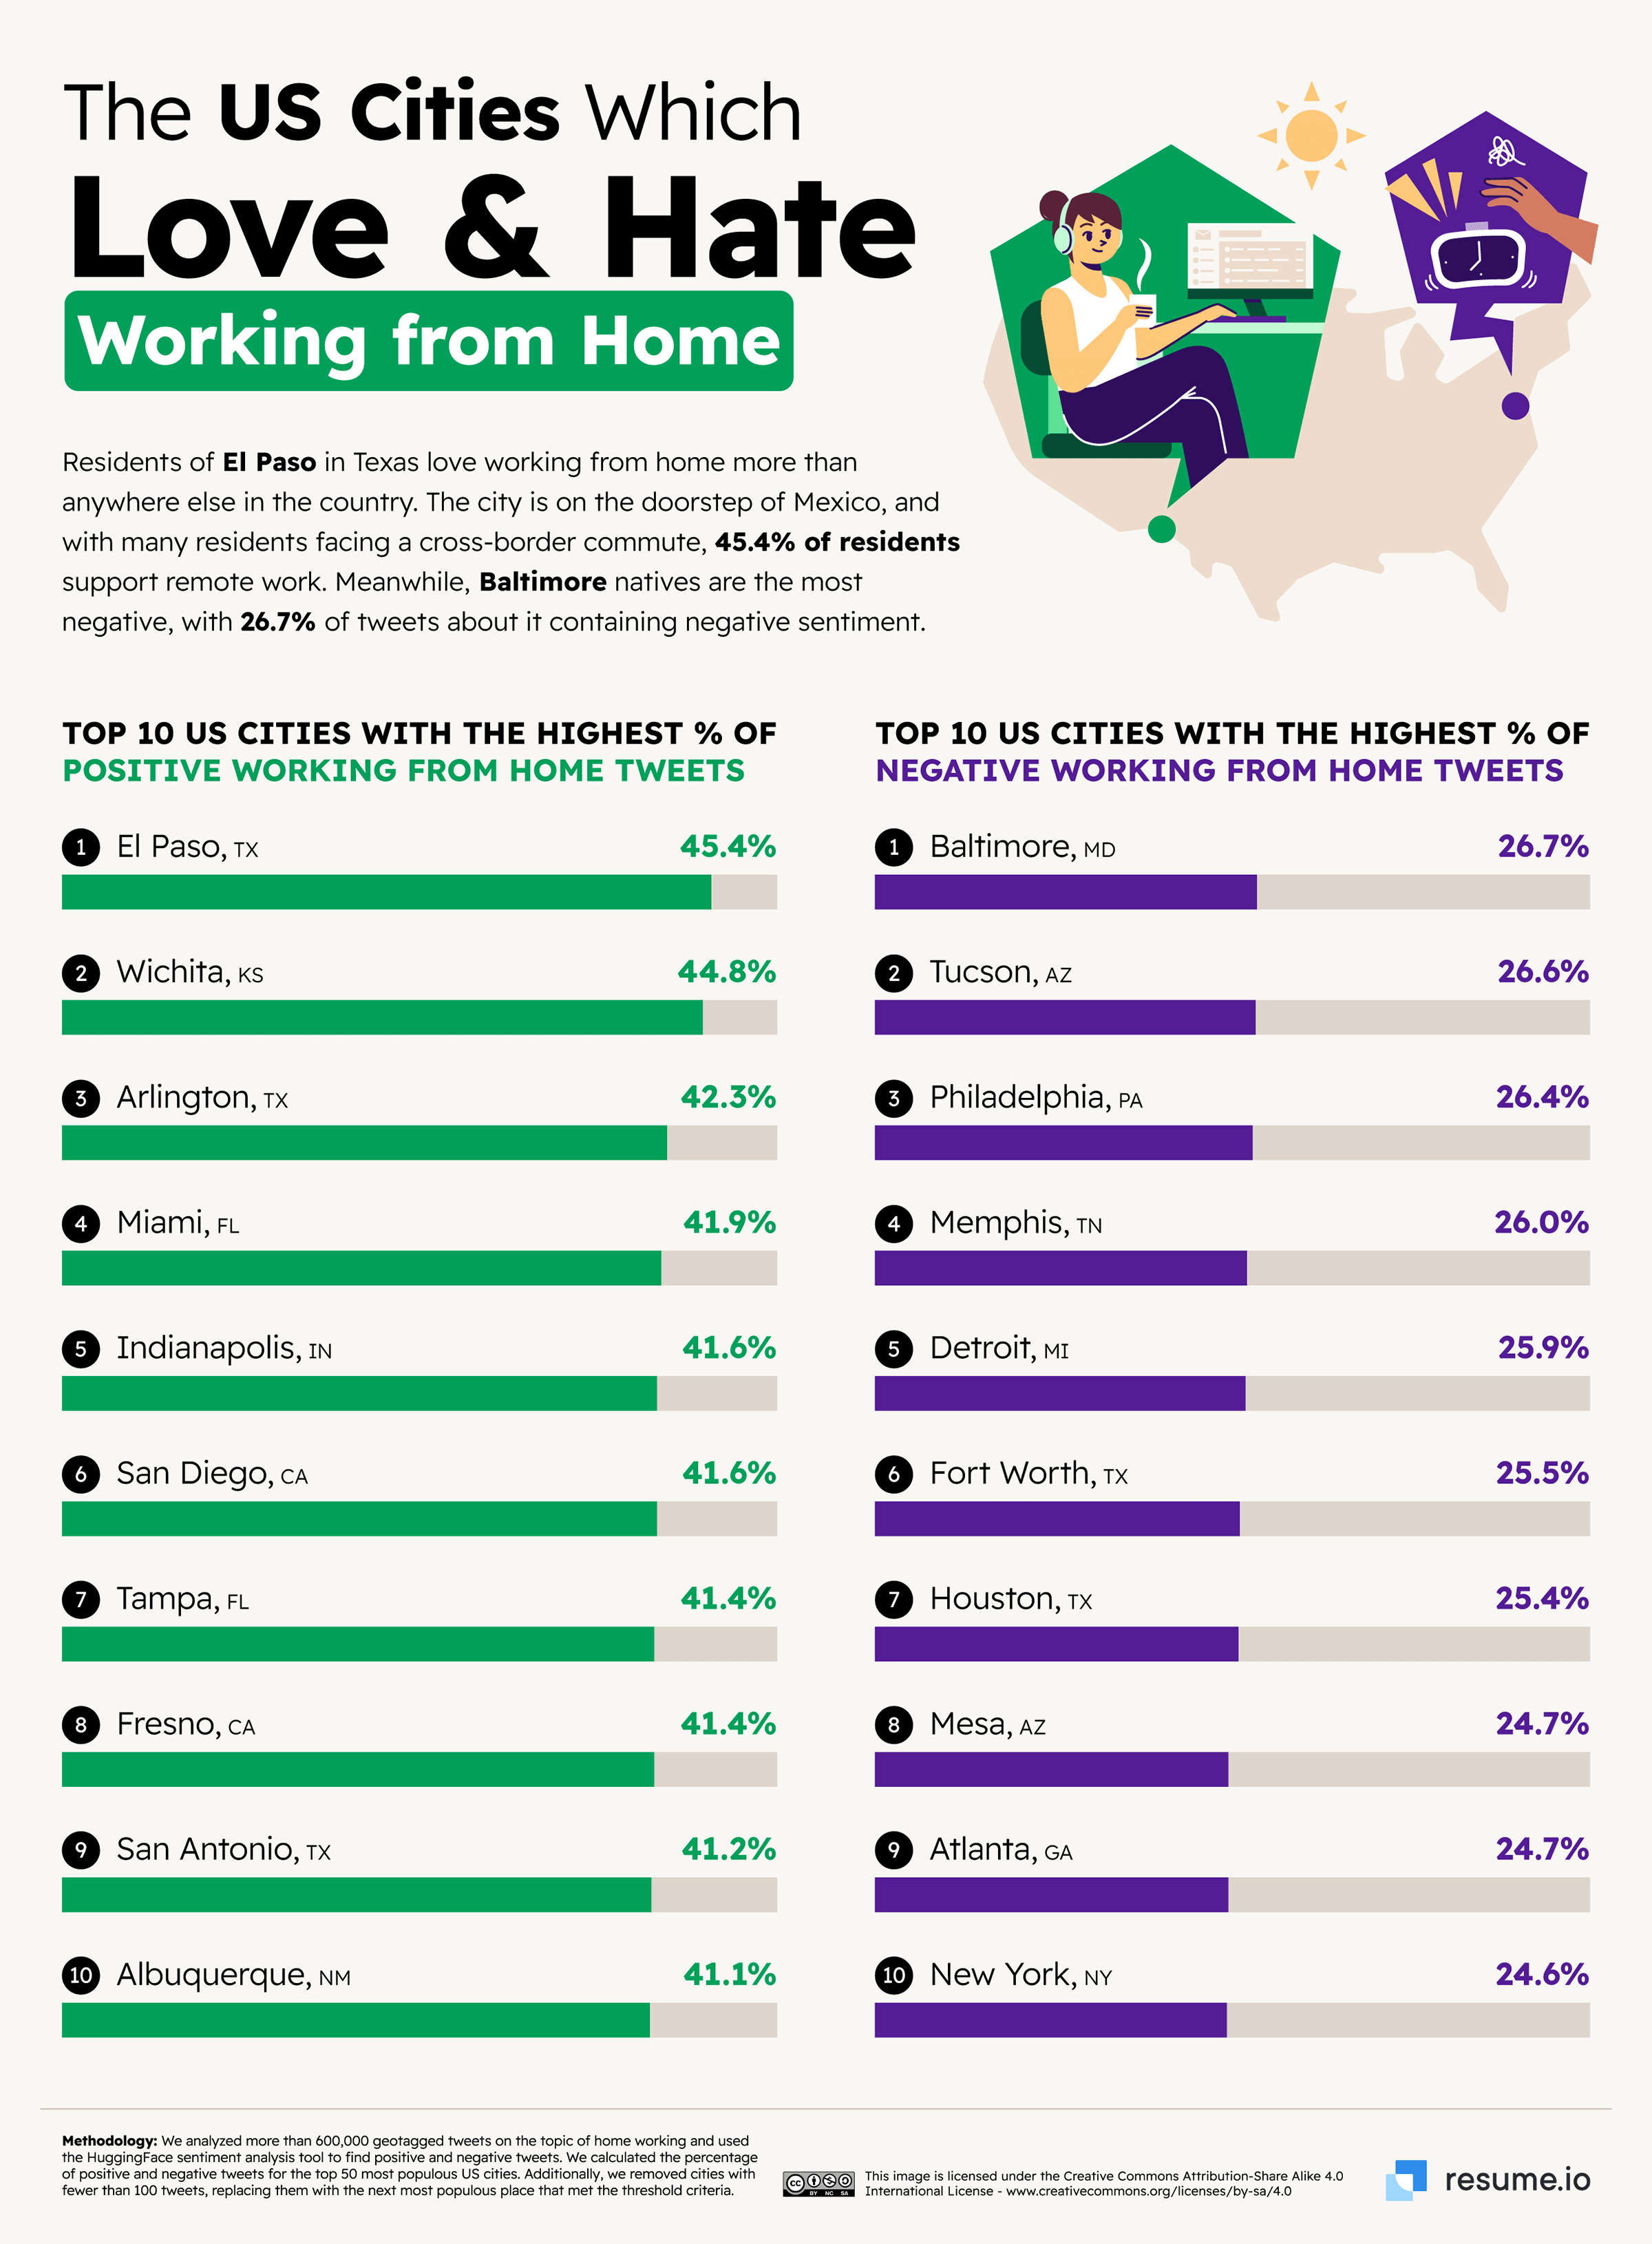 The US Cities which Love & Hate working from home.